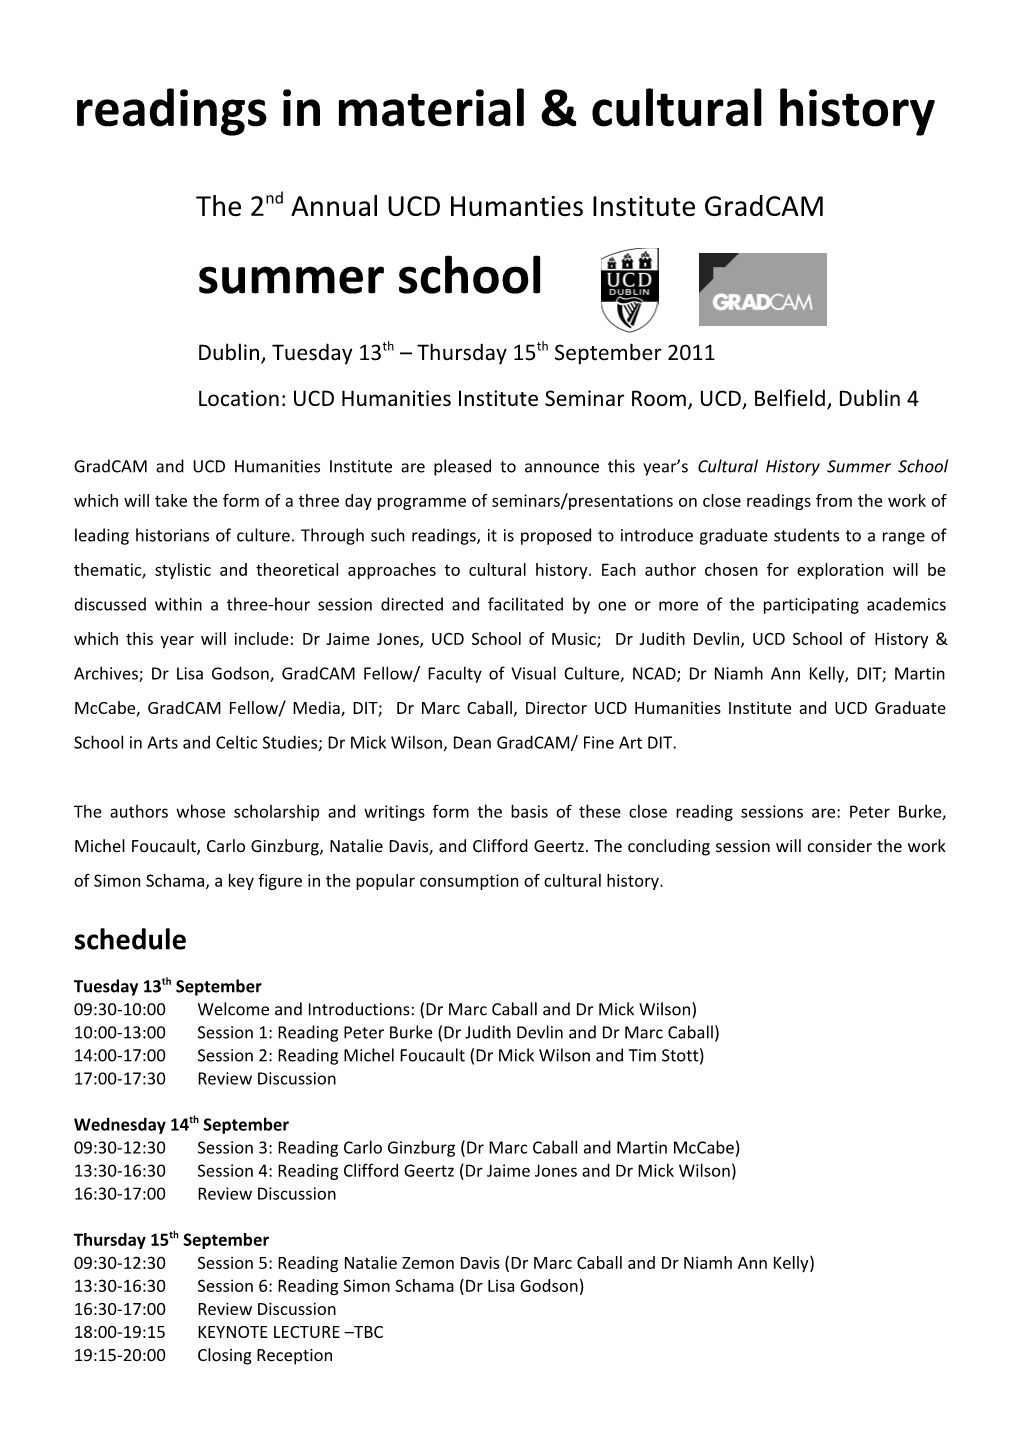 Readings in Material & Cultural History: the 2Nd Annual HII-Gradcam Summer School